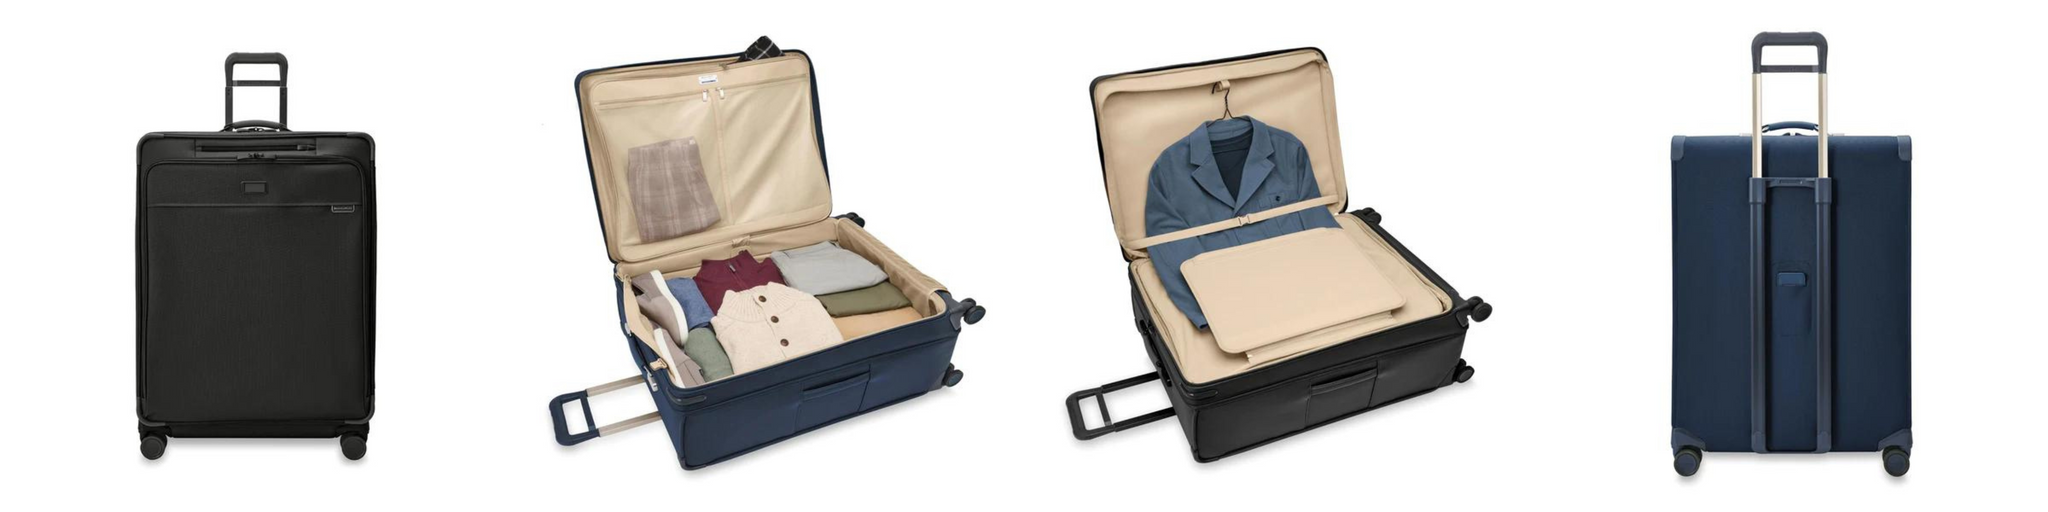 Luggage Size Guide: How to Pick the Best Bag